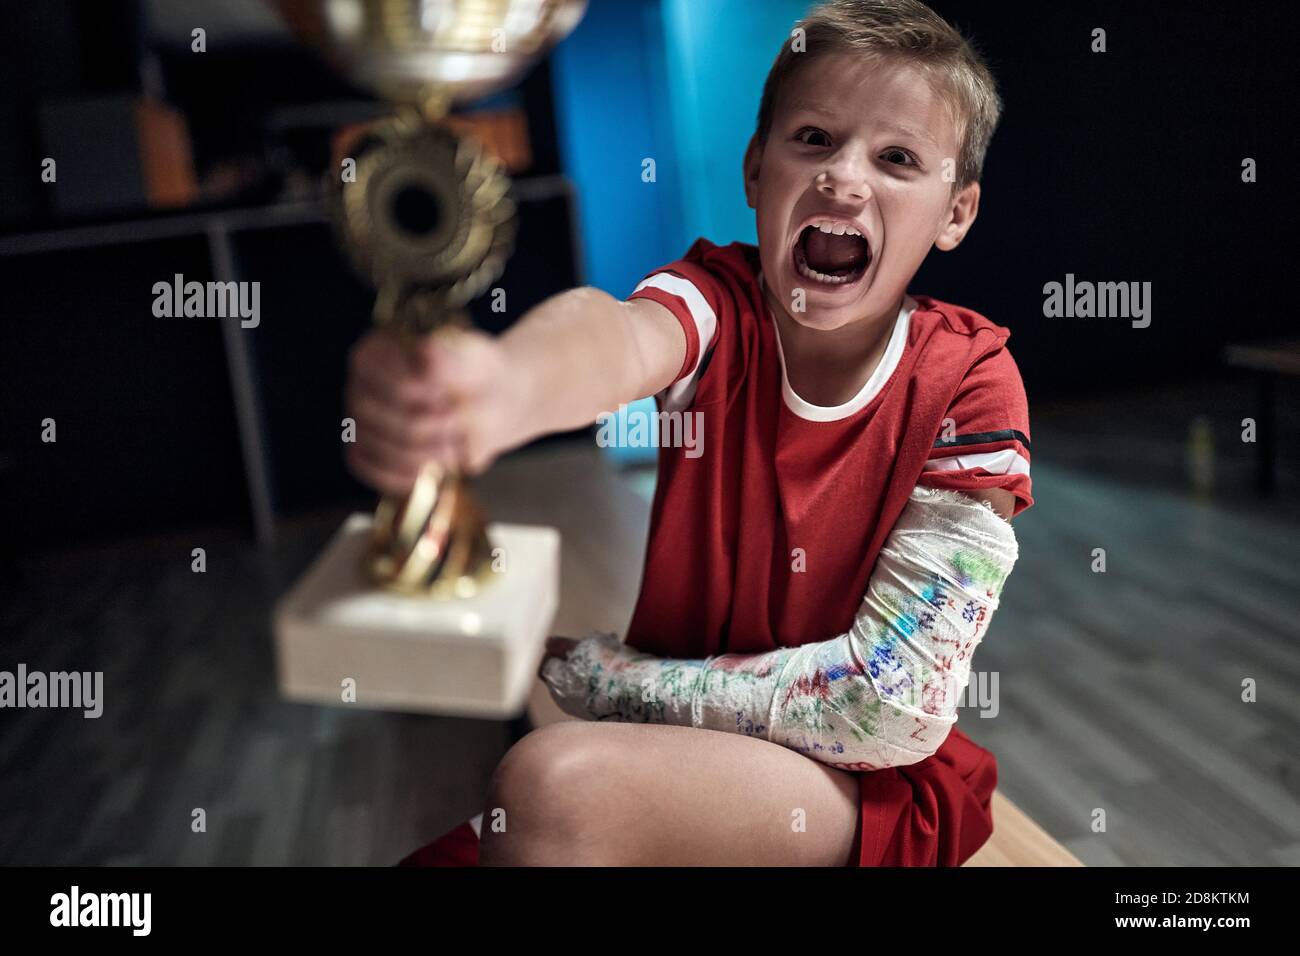 Excited little player at the locker room holding the trophy won in the match. Children team sport Stock Photo